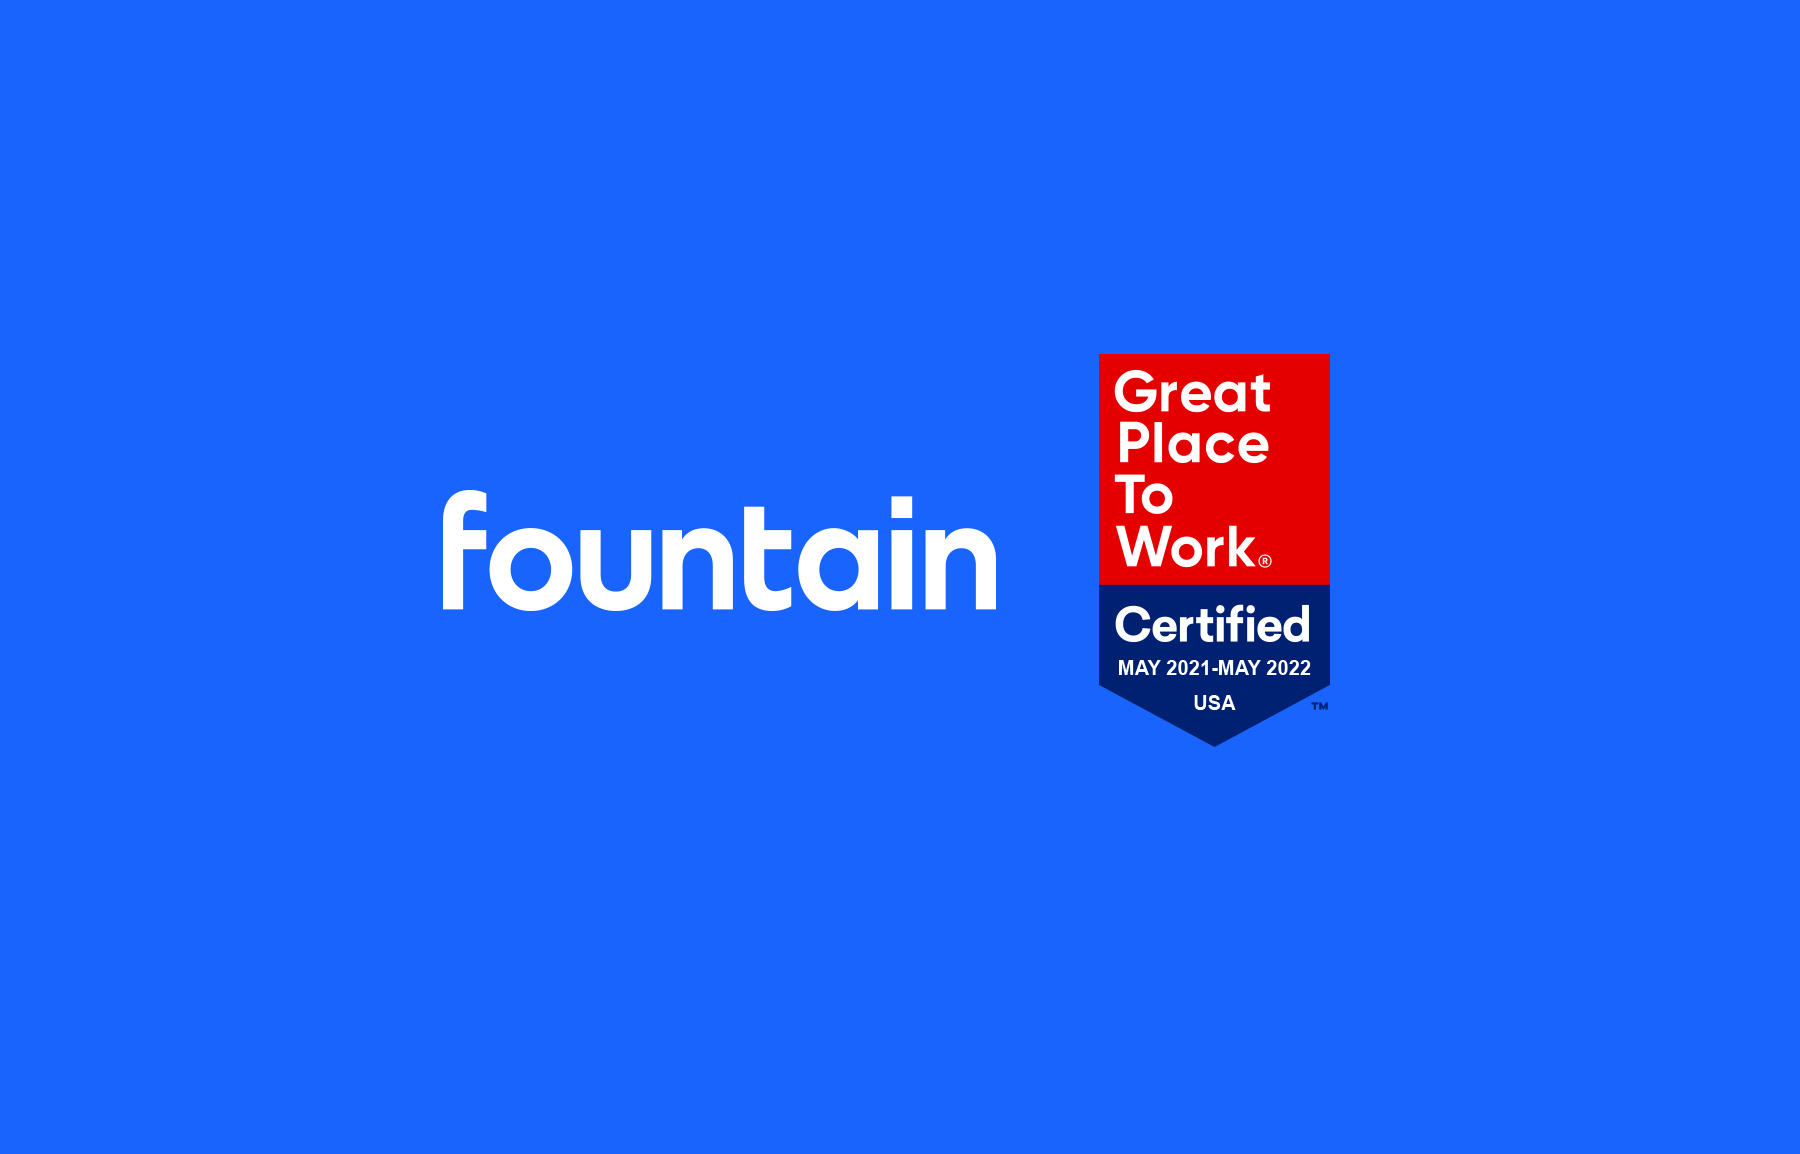 It’s Official—Fountain Earns 2021 Great Place to Work Certification™